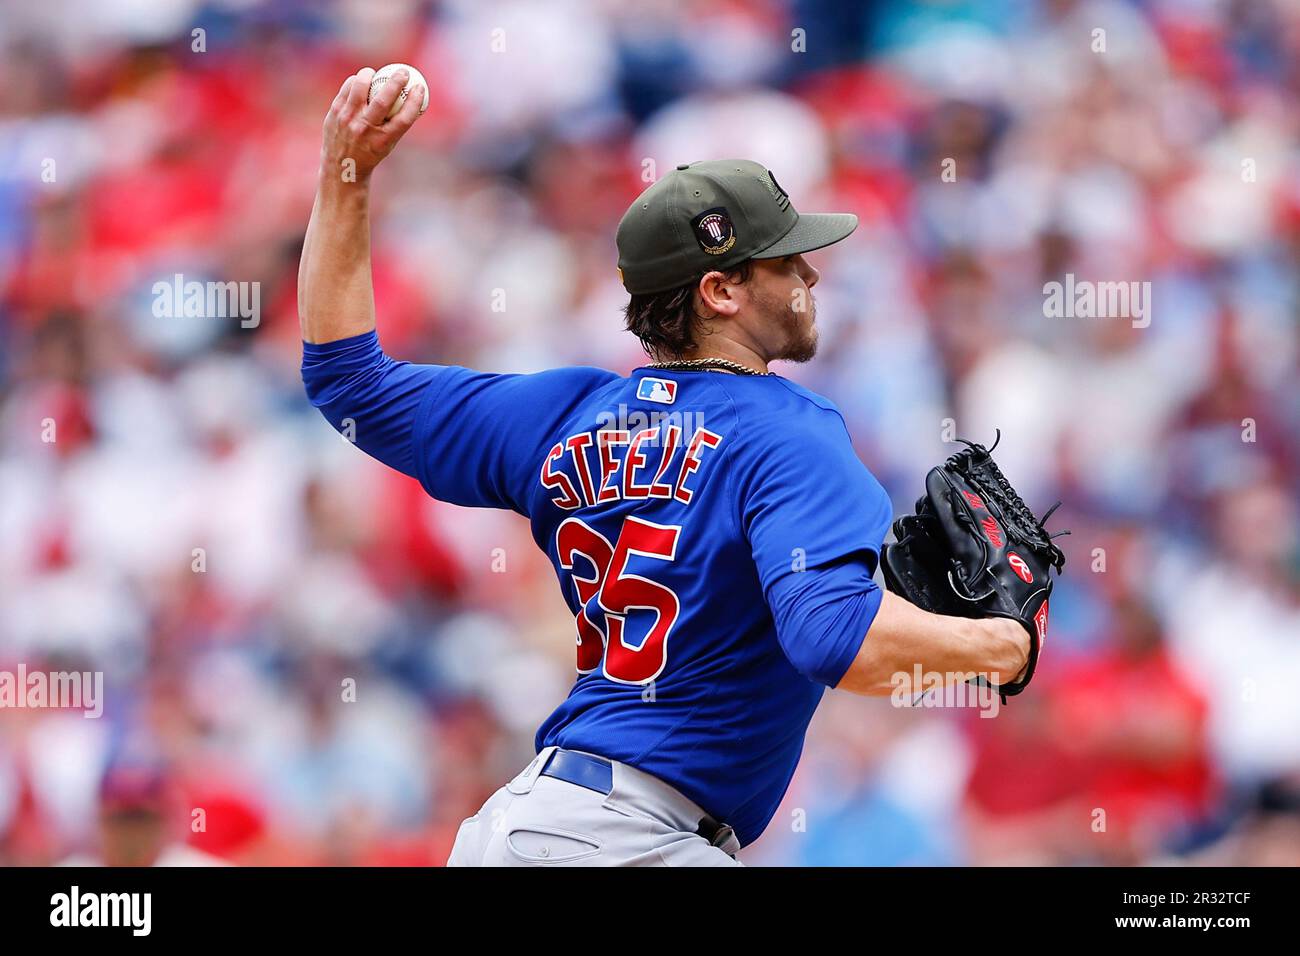 Justin Steele #35 of the Chicago Cubs on the mound during the 2023 MLB  London Series match St. Louis Cardinals vs Chicago Cubs at London Stadium,  London, United Kingdom, 24th June 2023 (